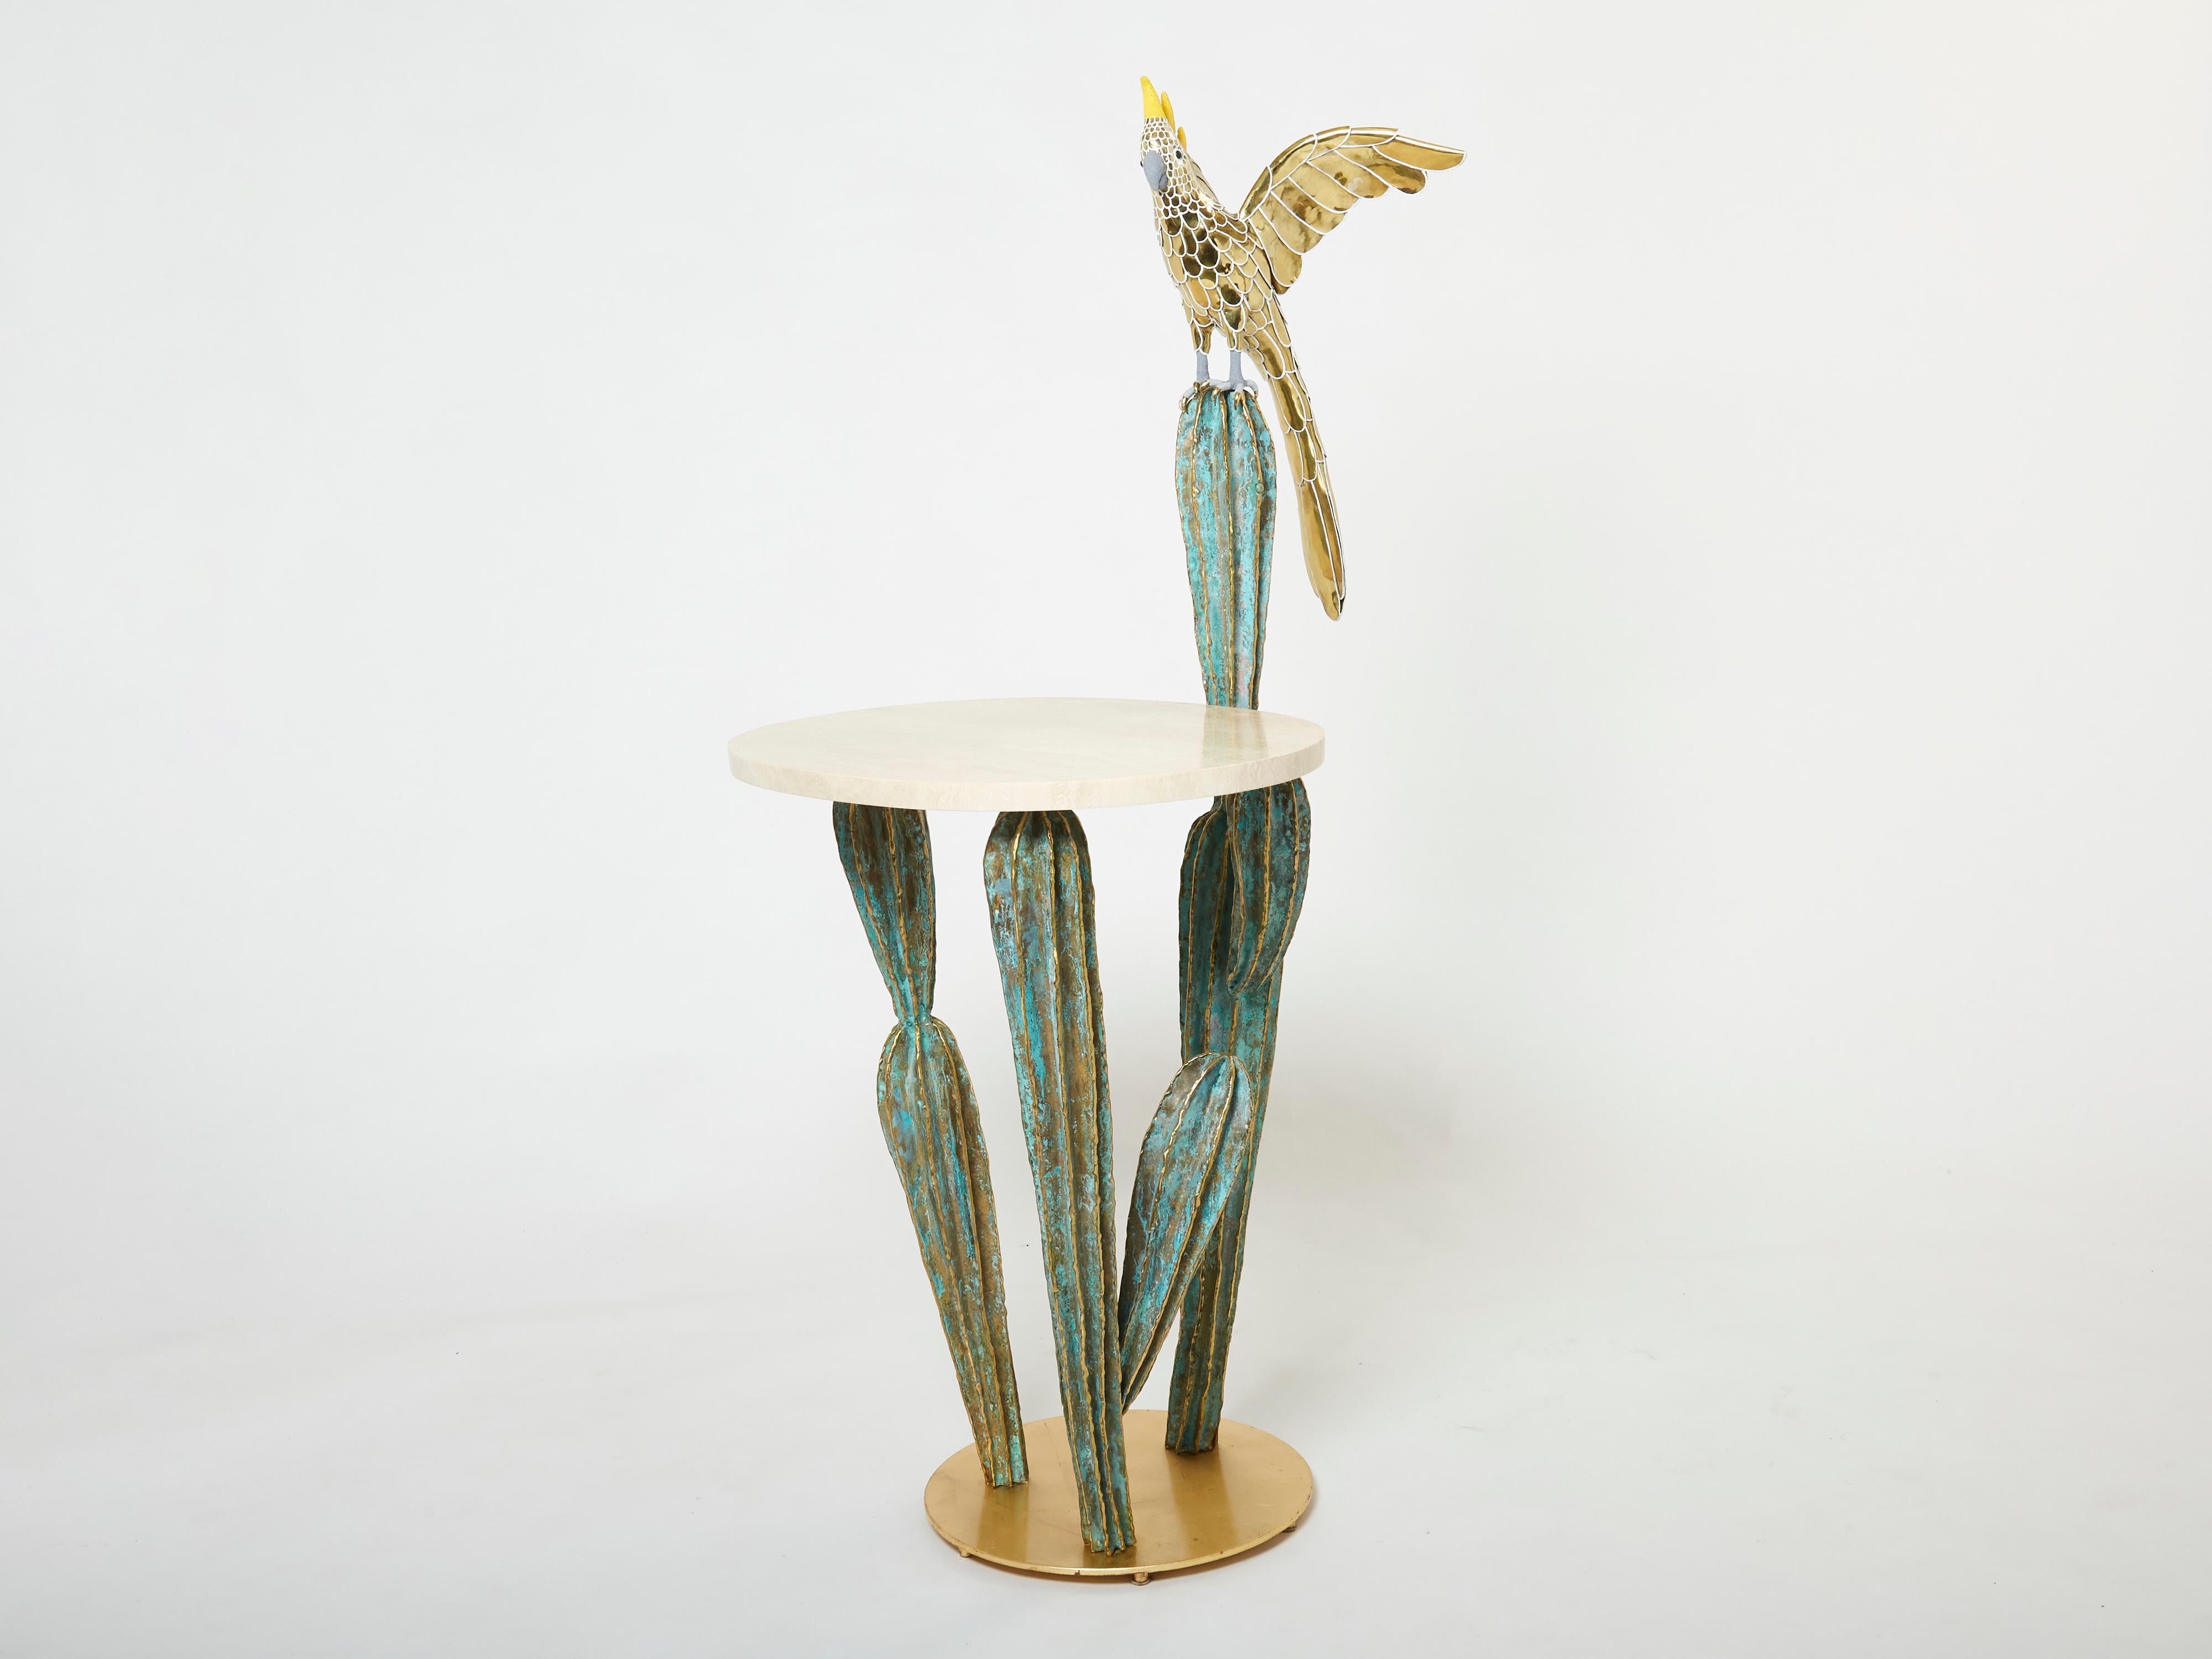 This unique cactus and parrot sculpture console table signed Alain Chervet is made of solid gilded and oxidized brass, and dated 1989. It features an oval slick travertine top. The console base is made of brushed brass, supporting a beautiful green